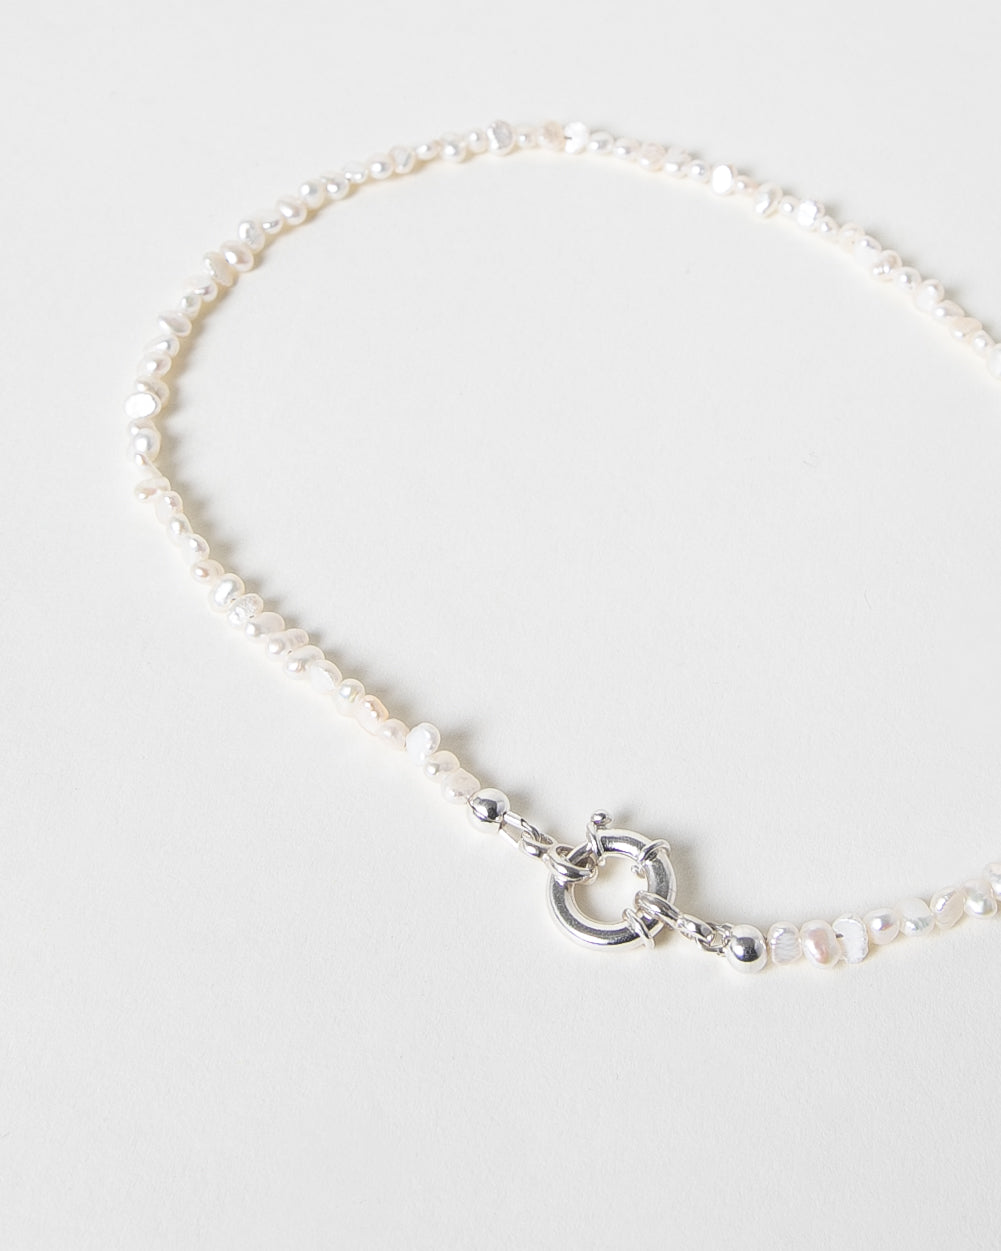 Freshwater Pearl Necklace with Chunky Sterling Silver Bolt Clasp